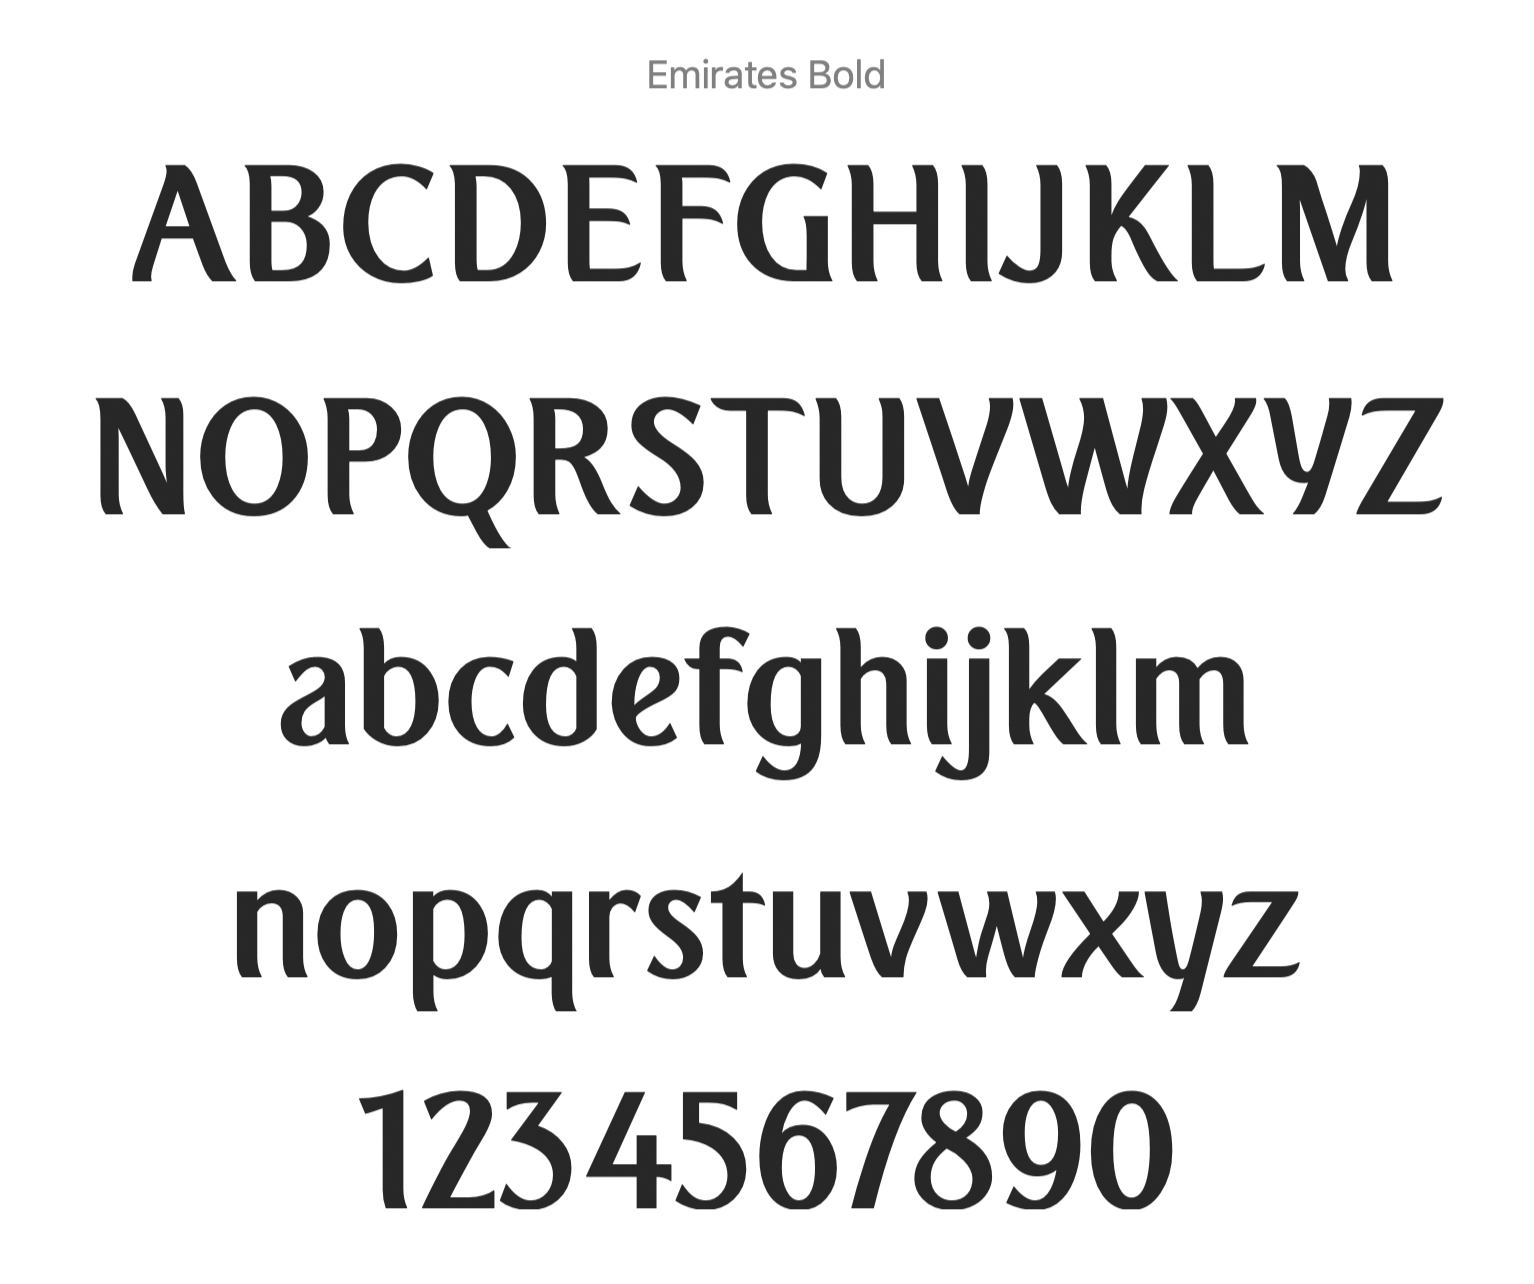 Here is the Emirates font